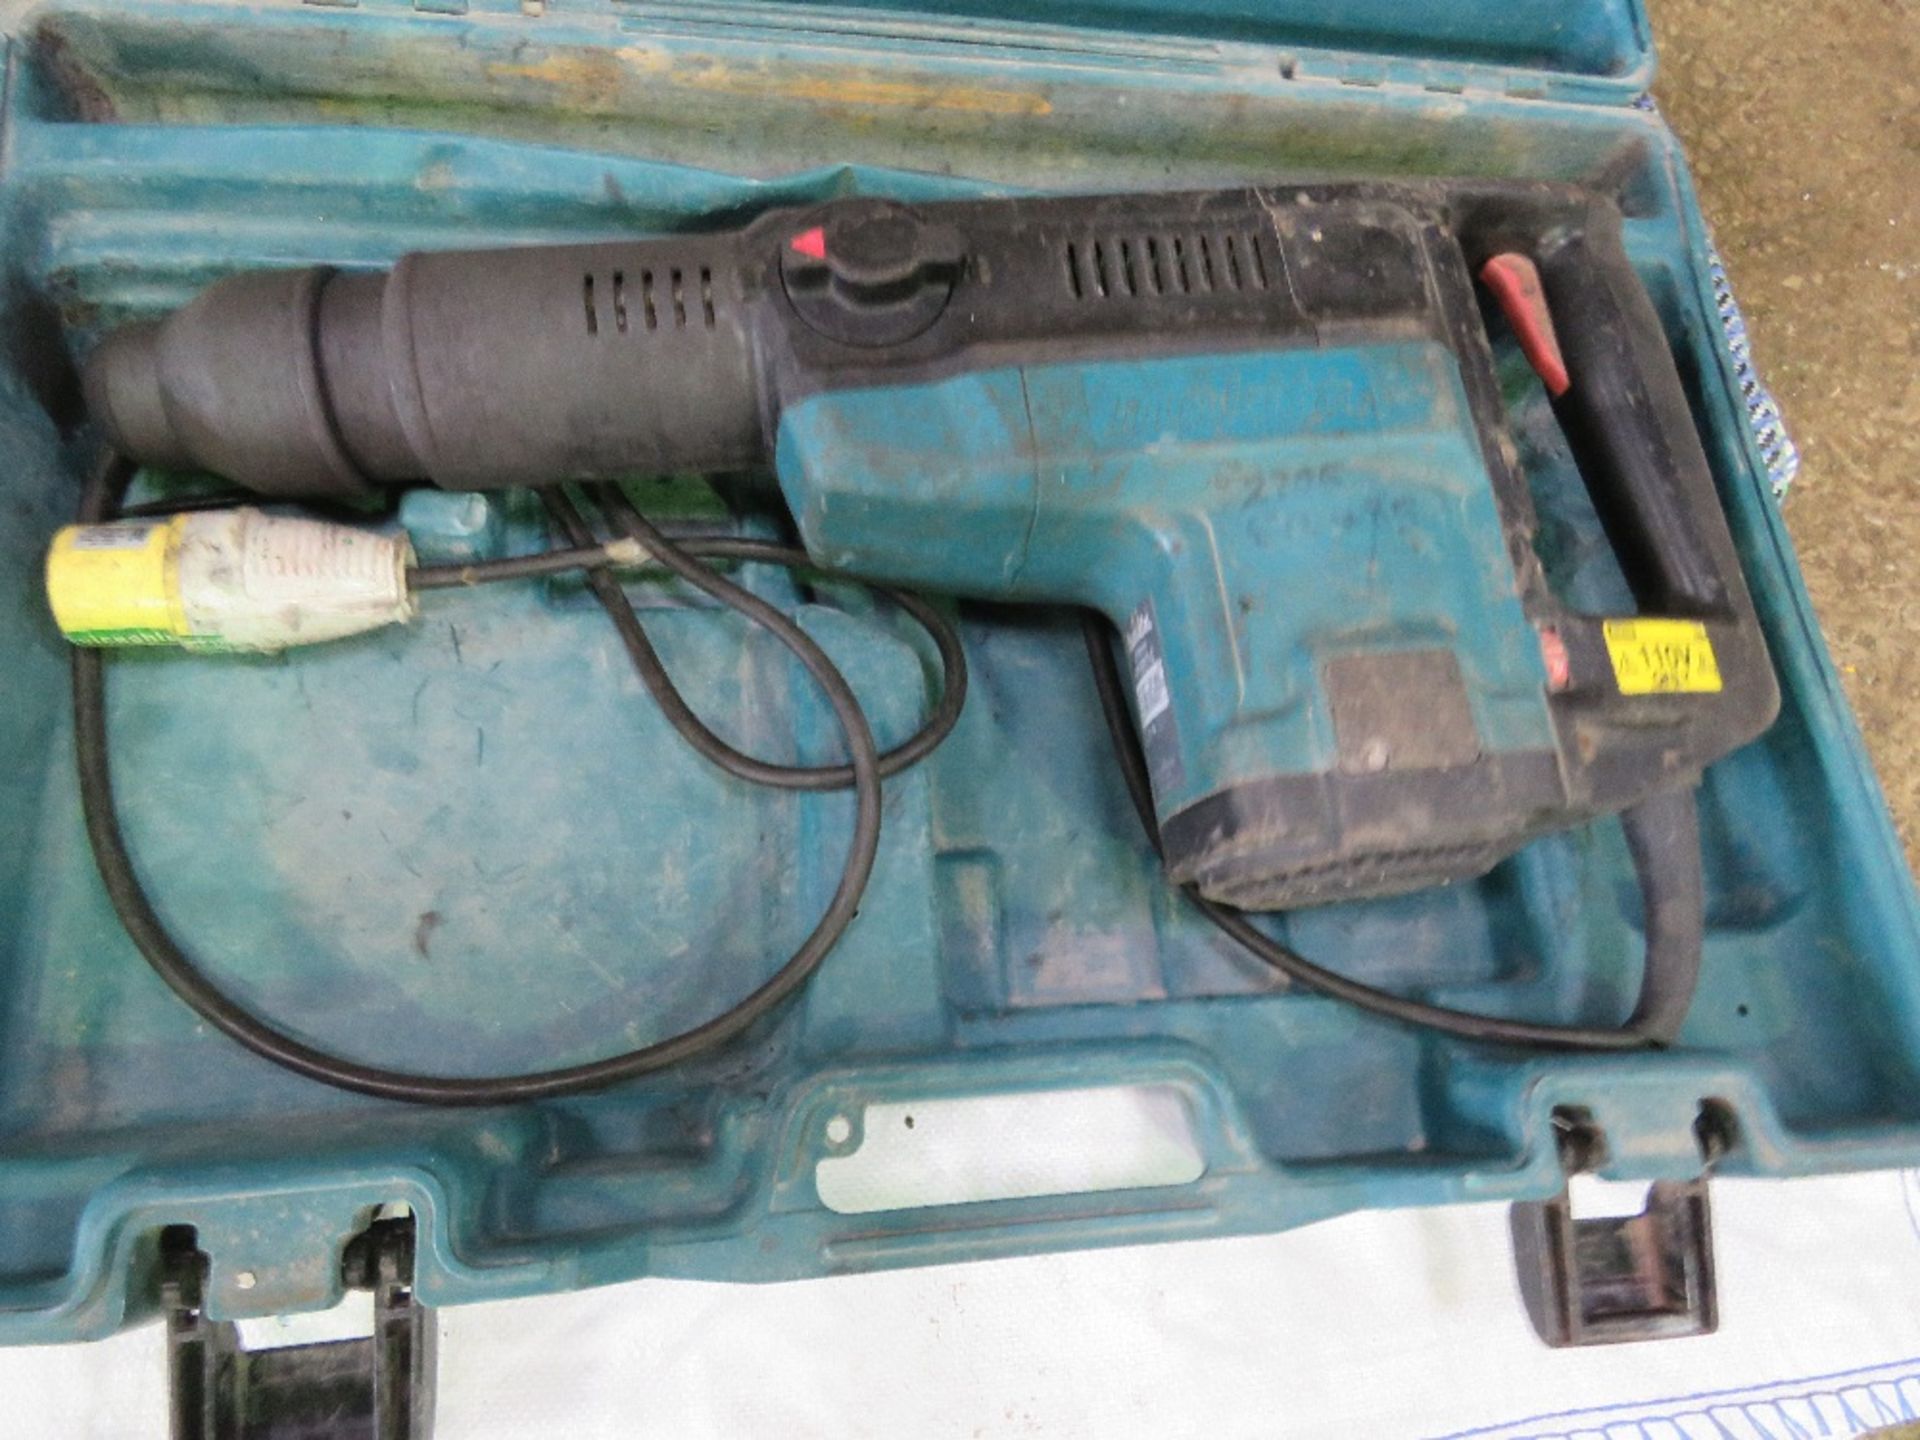 MAKITA 110VOLT HEAVY DUTY BREAKER IN A CASE. SOURCED FROM LOCAL DEPOT CLOSURE.